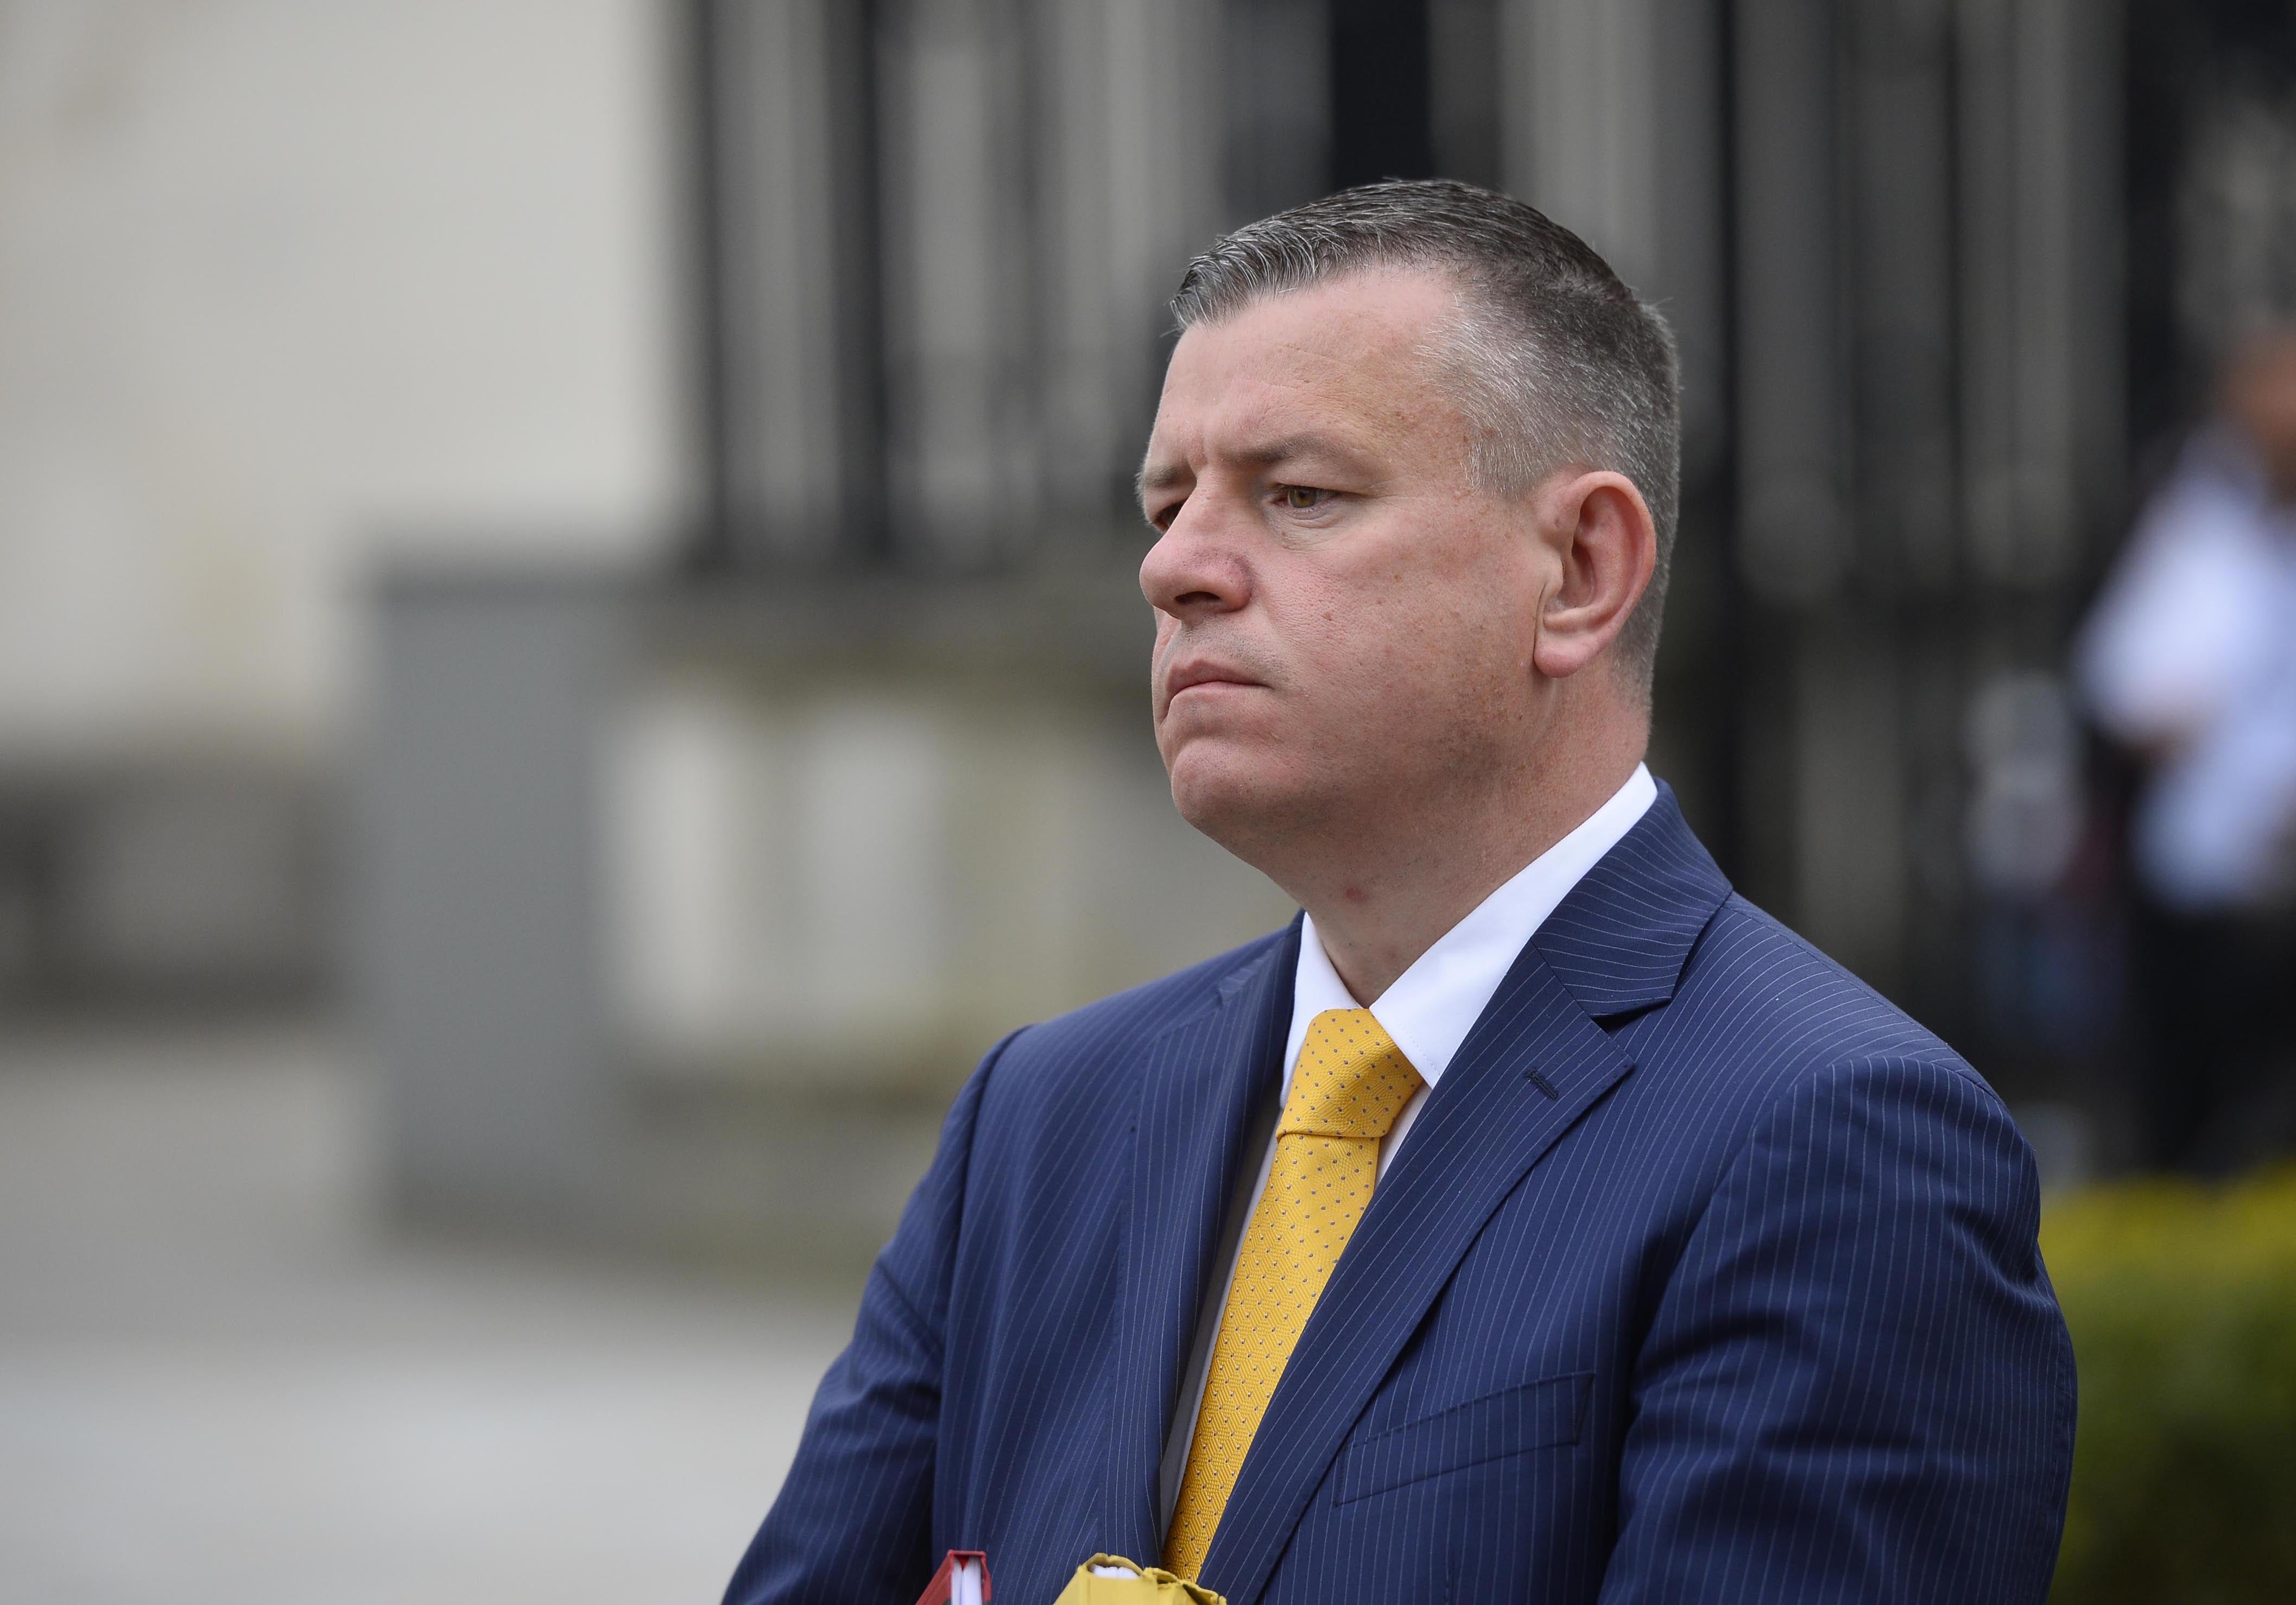 Solicitor Niall Murphy, who represents families affected by the Police Ombudsman report into 11 UDA murders in south Belfast in the 1990s, said the Government is trying to shut down future scrutiny of allegations of security force collusion (Mark Marlow/PA)